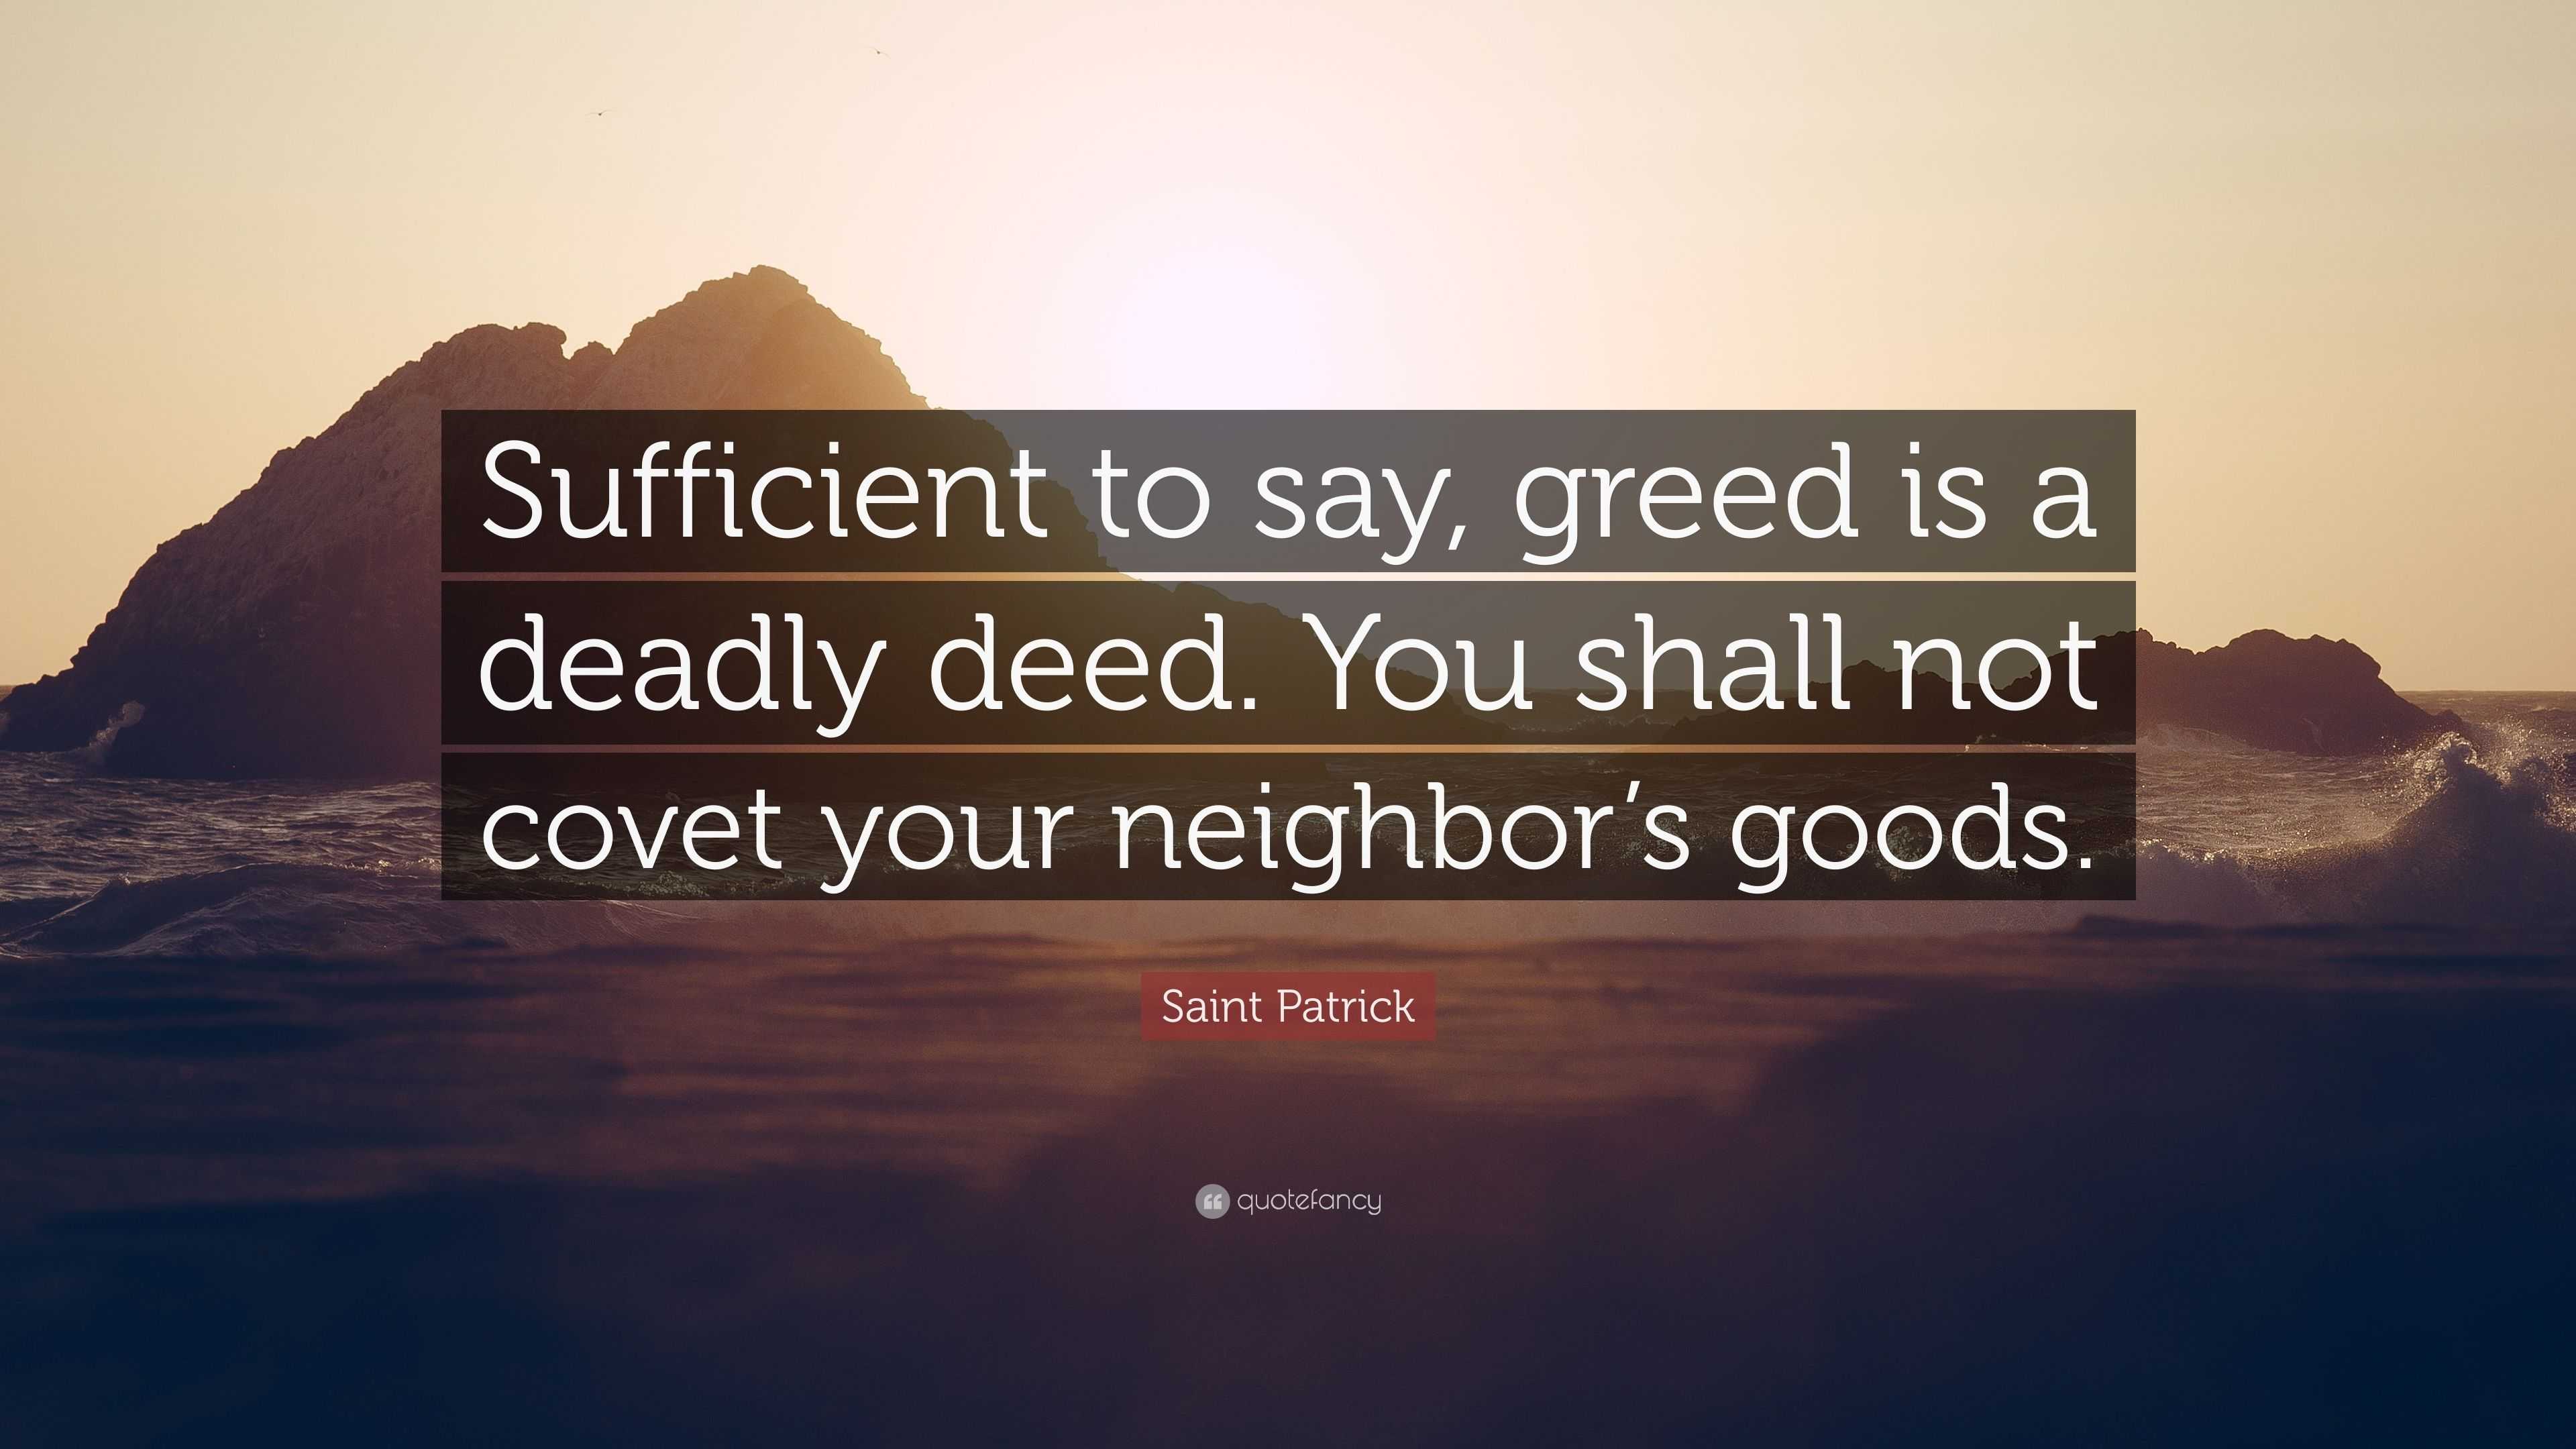 Saint Patrick Quote “sufficient To Say Greed Is A Deadly Deed You Shall Not Covet Your